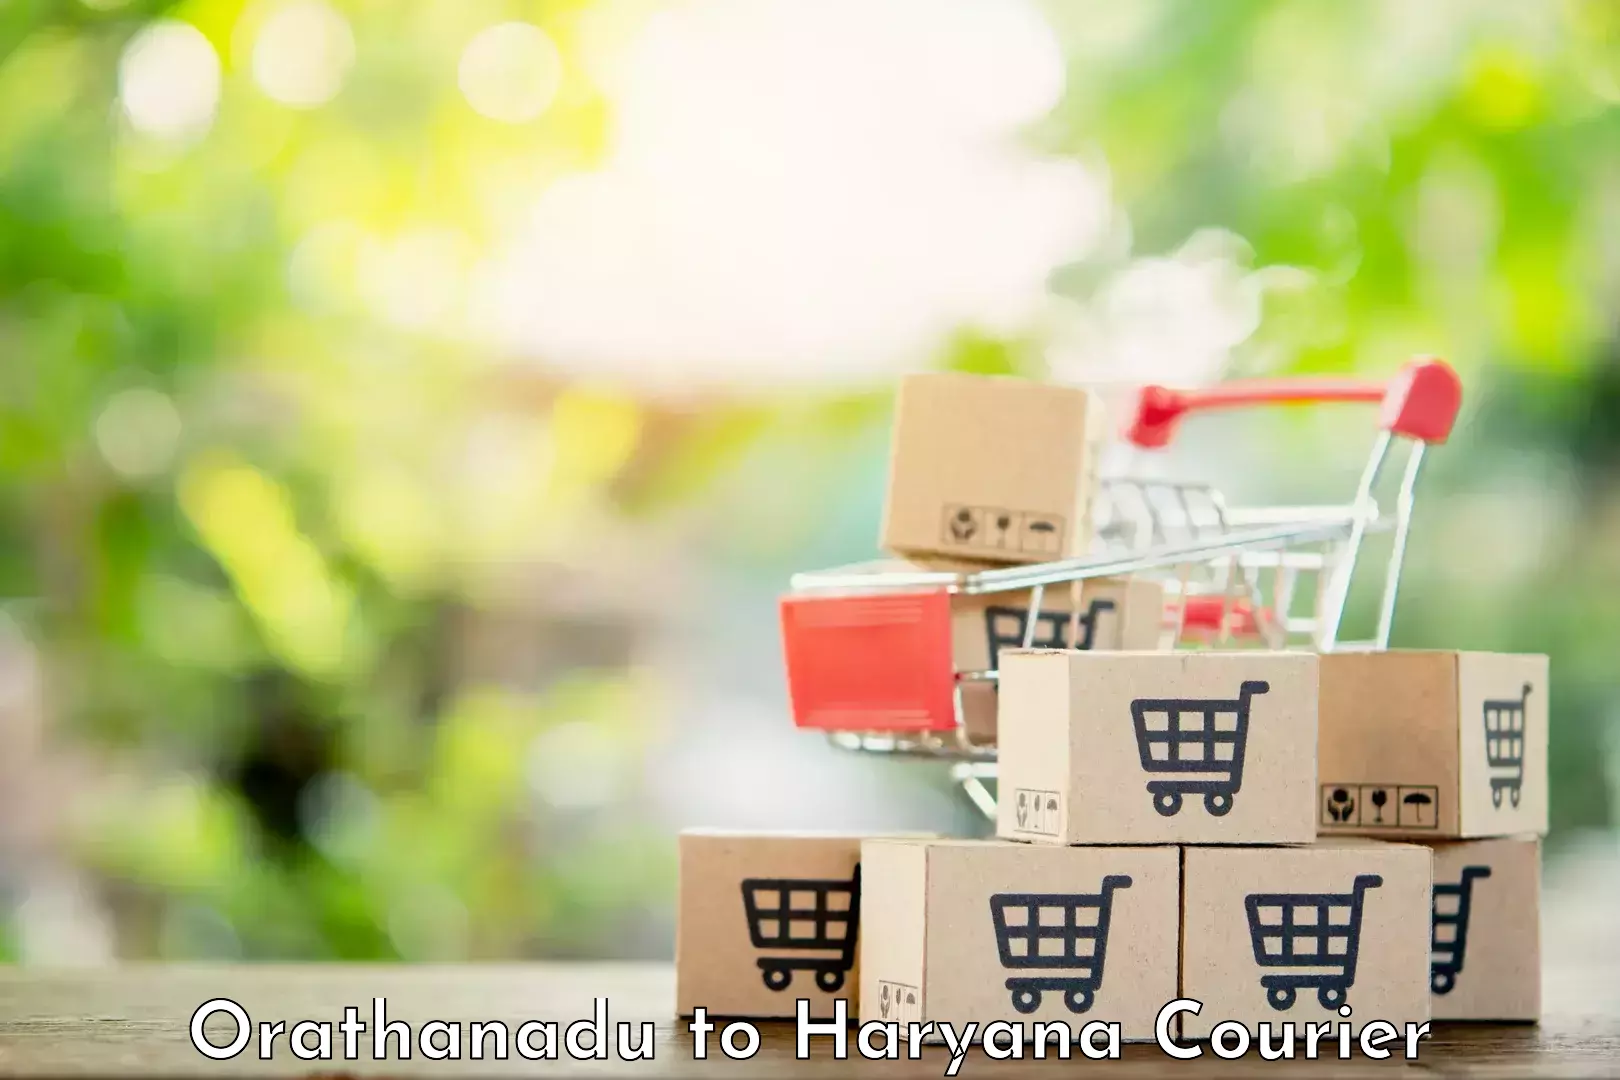 Bulk courier orders in Orathanadu to Palwal